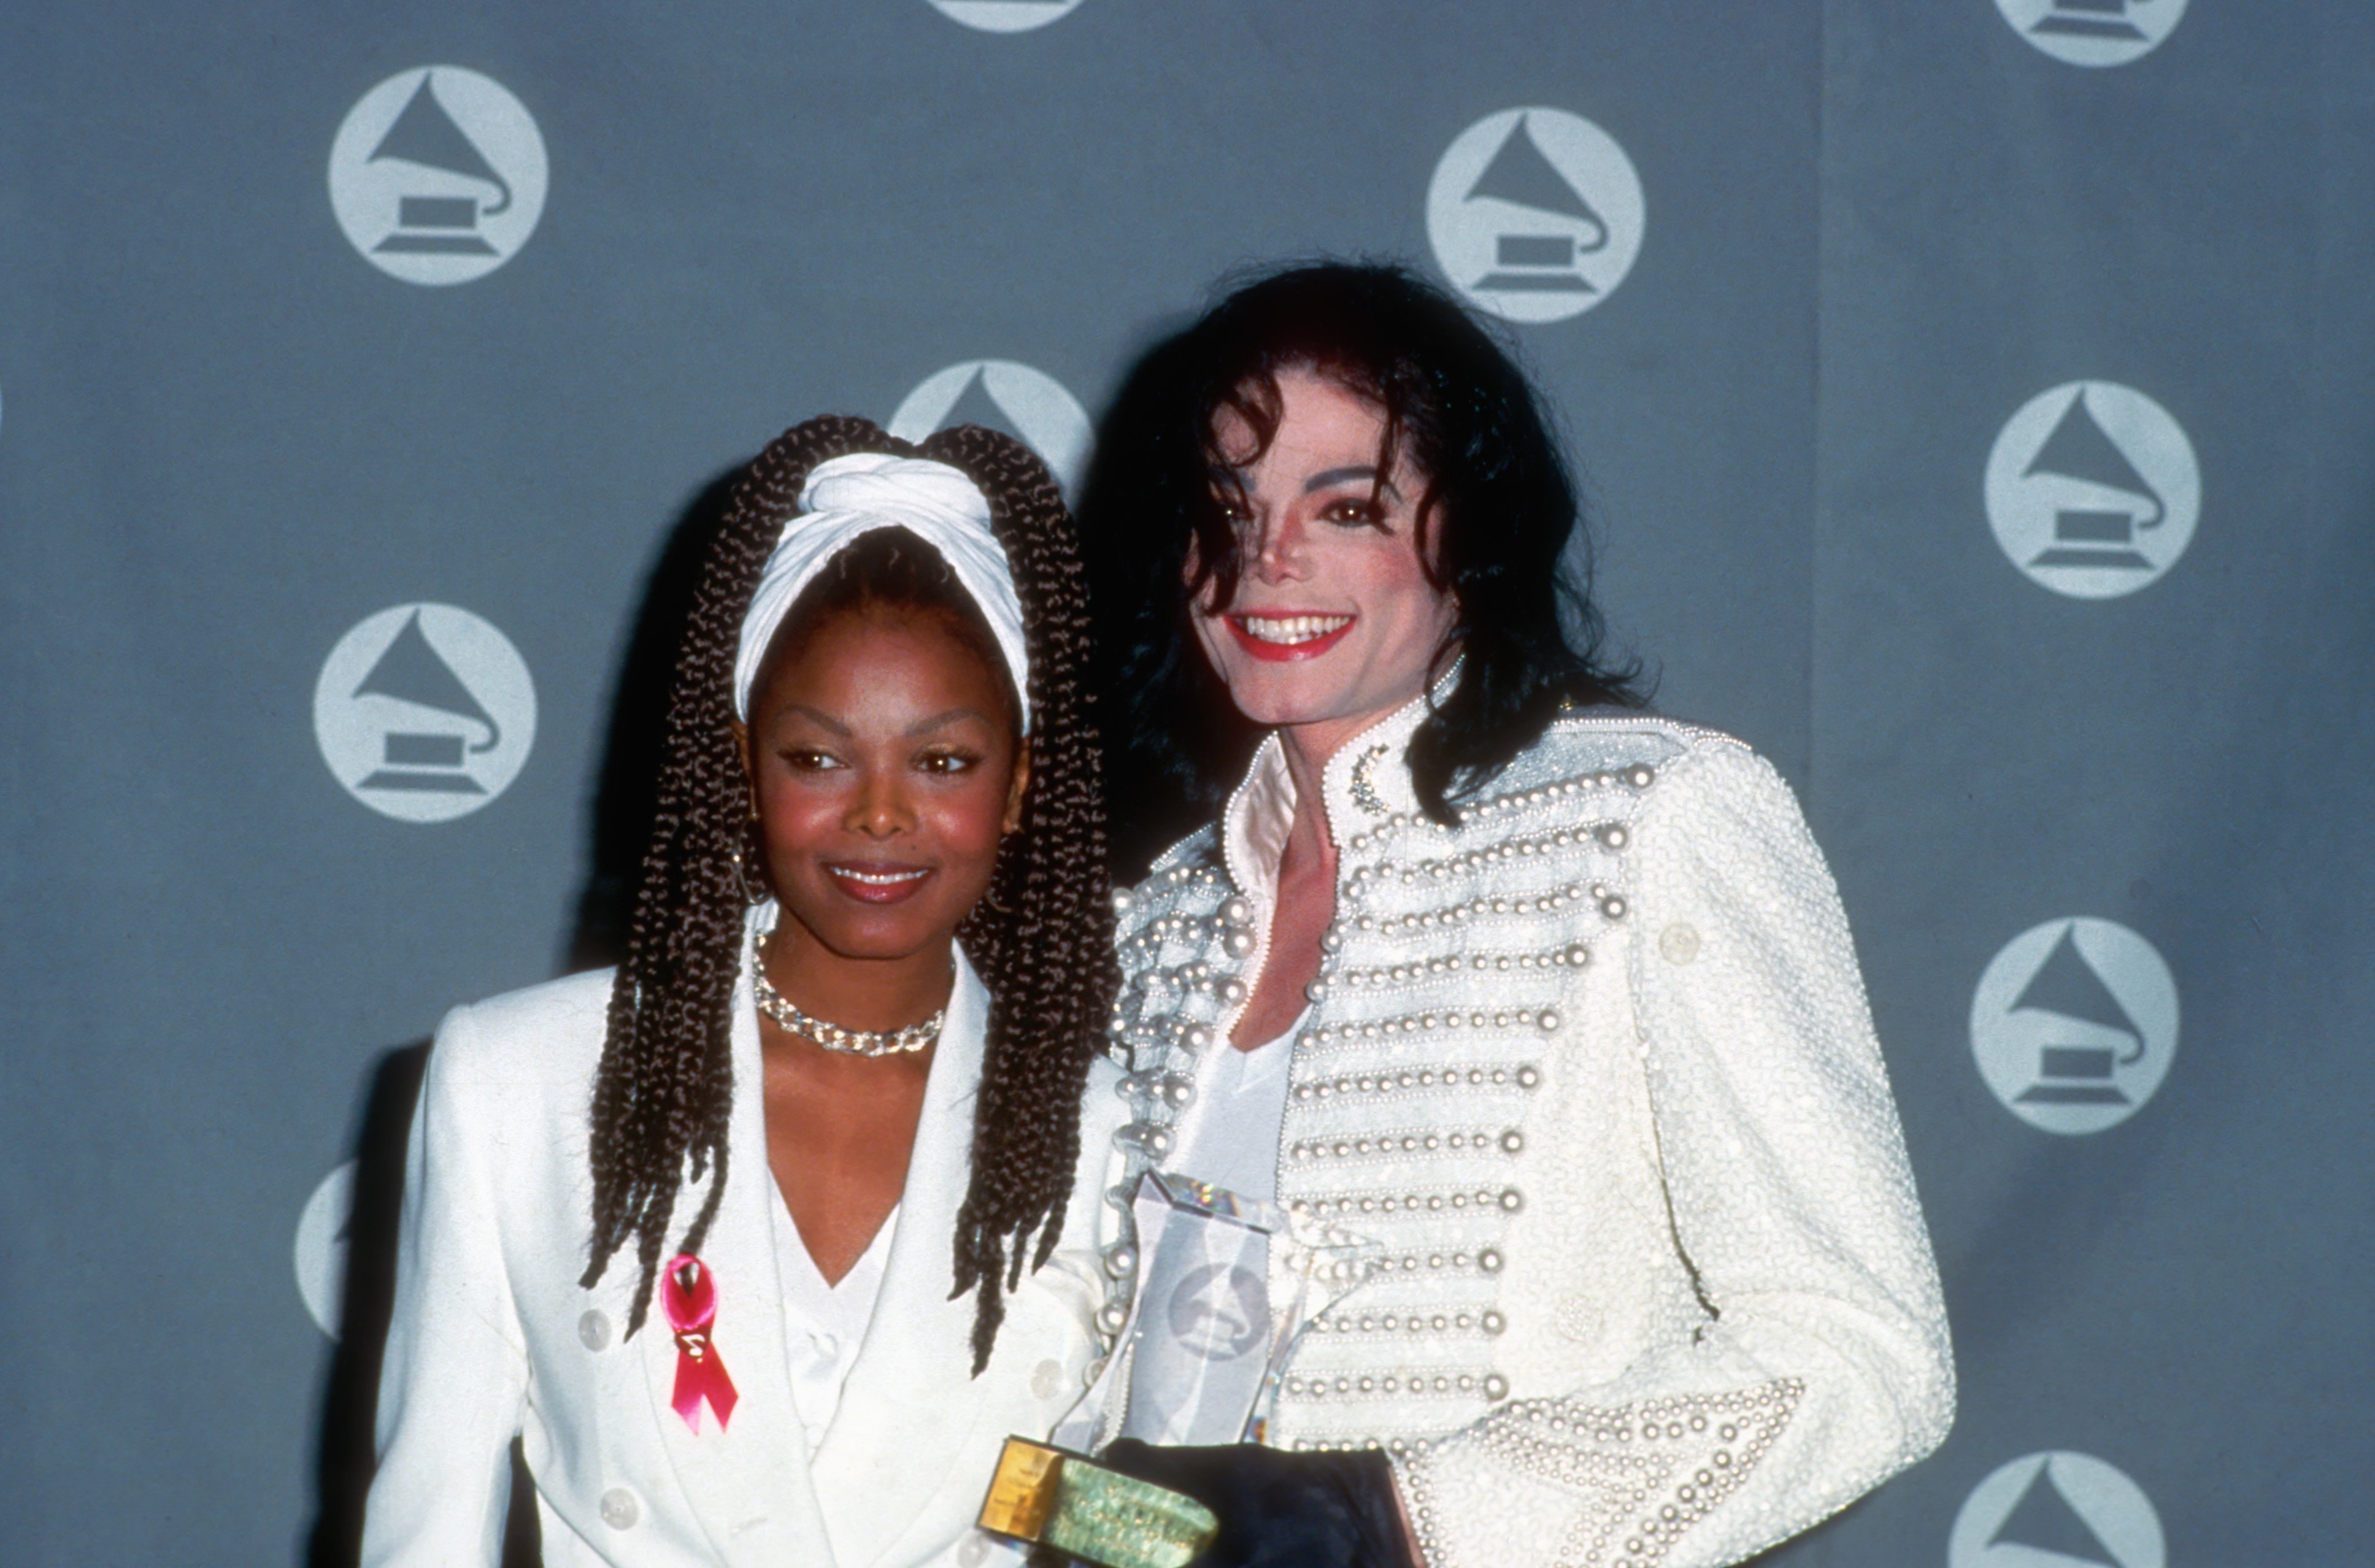 Janet Jackson and Michael Jackson pose for a photo backstage at the GRAMMY Awards in 1993